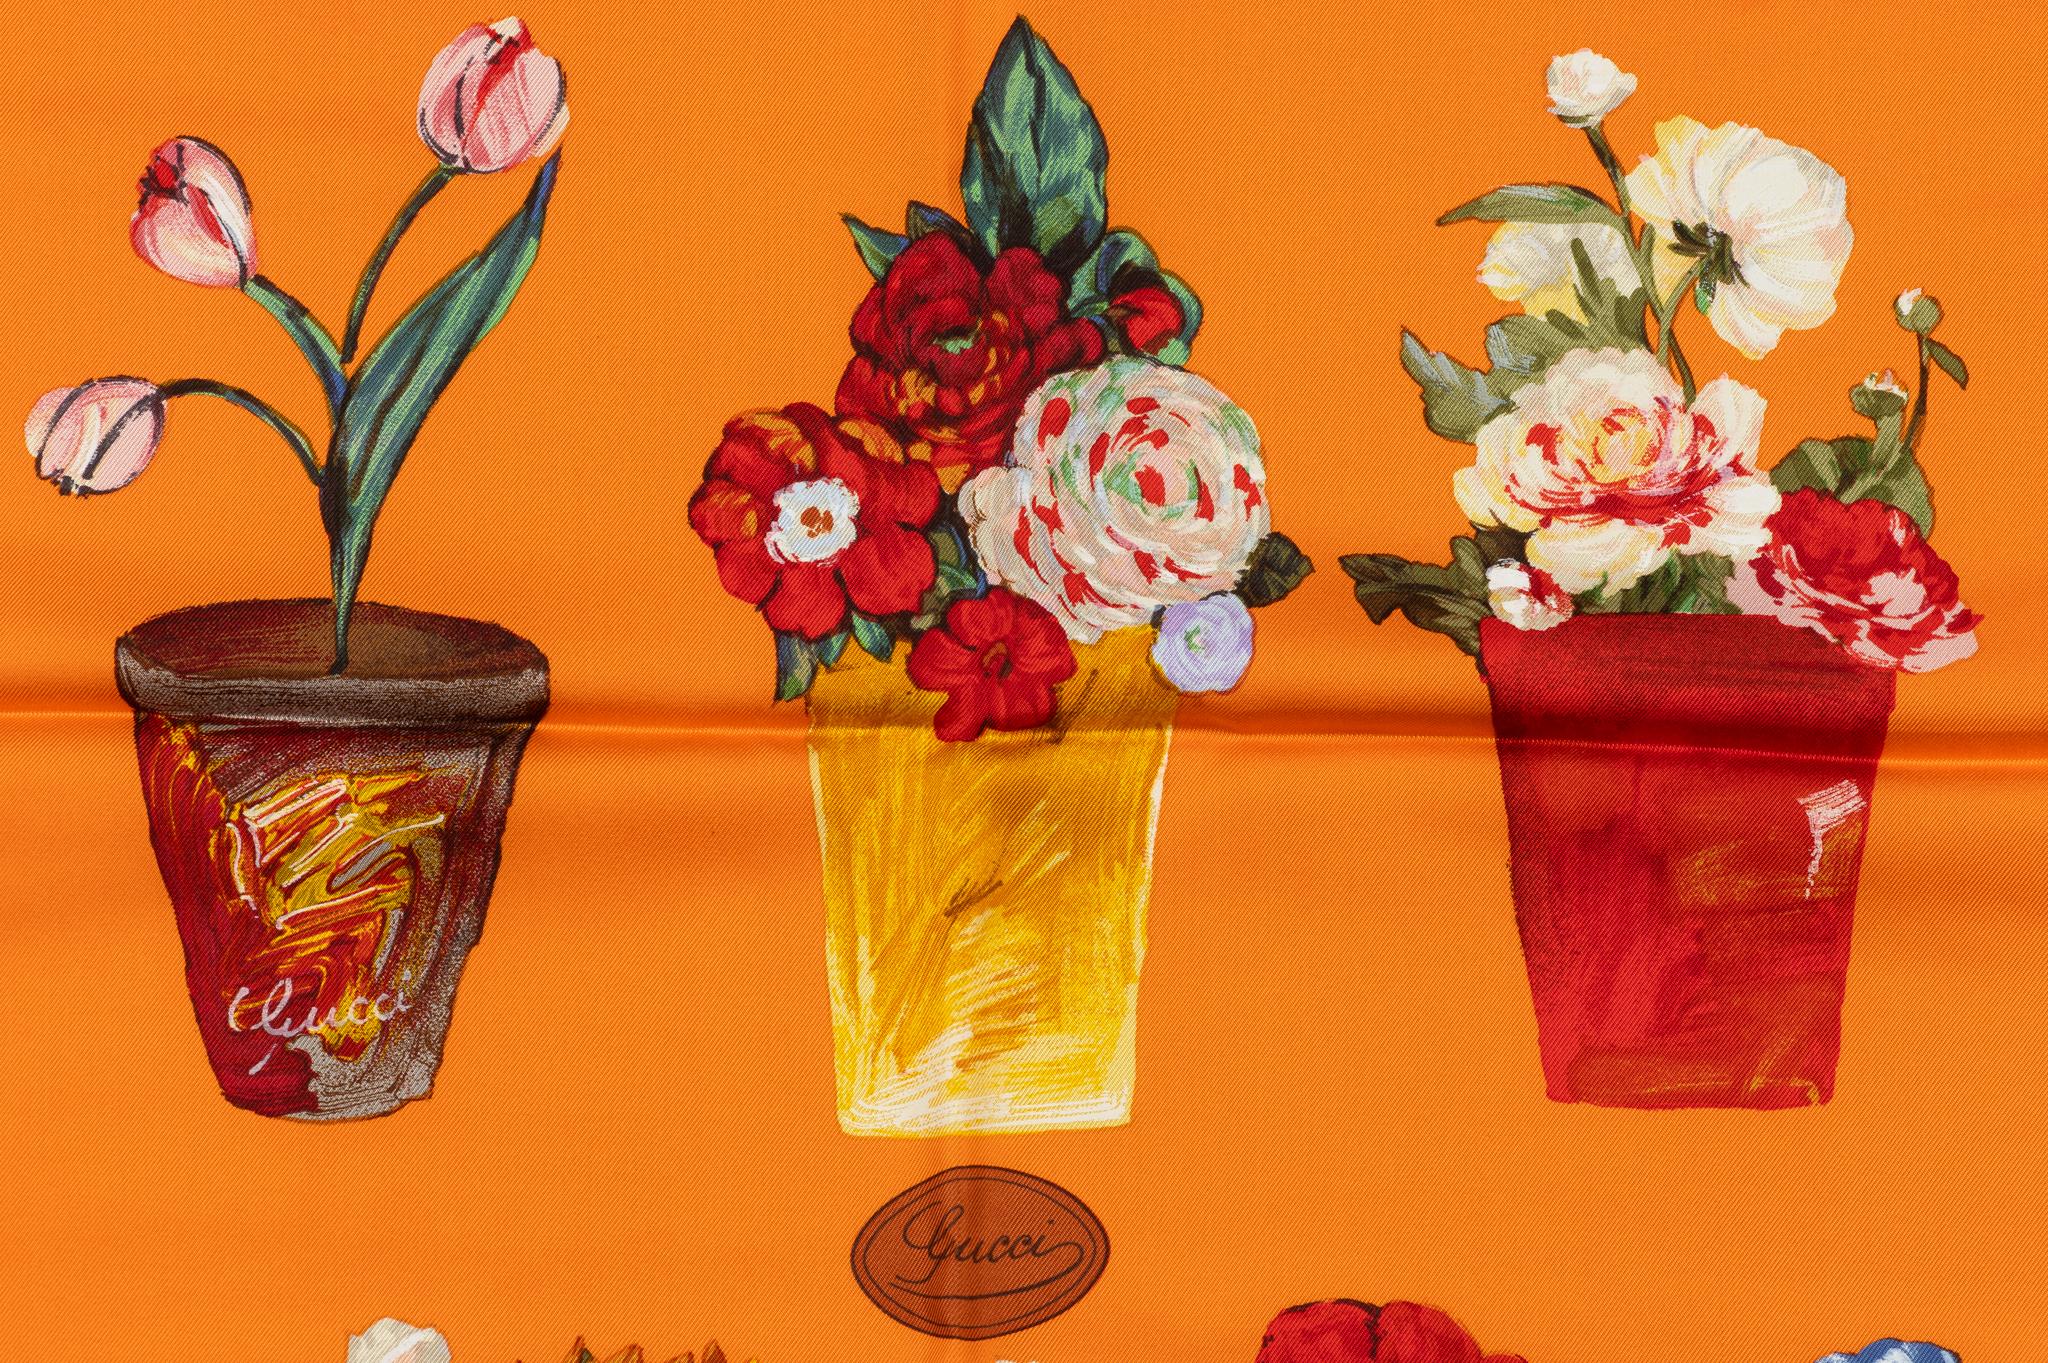 Gucci Orange Flower Vases Silk Scarf In Excellent Condition For Sale In West Hollywood, CA